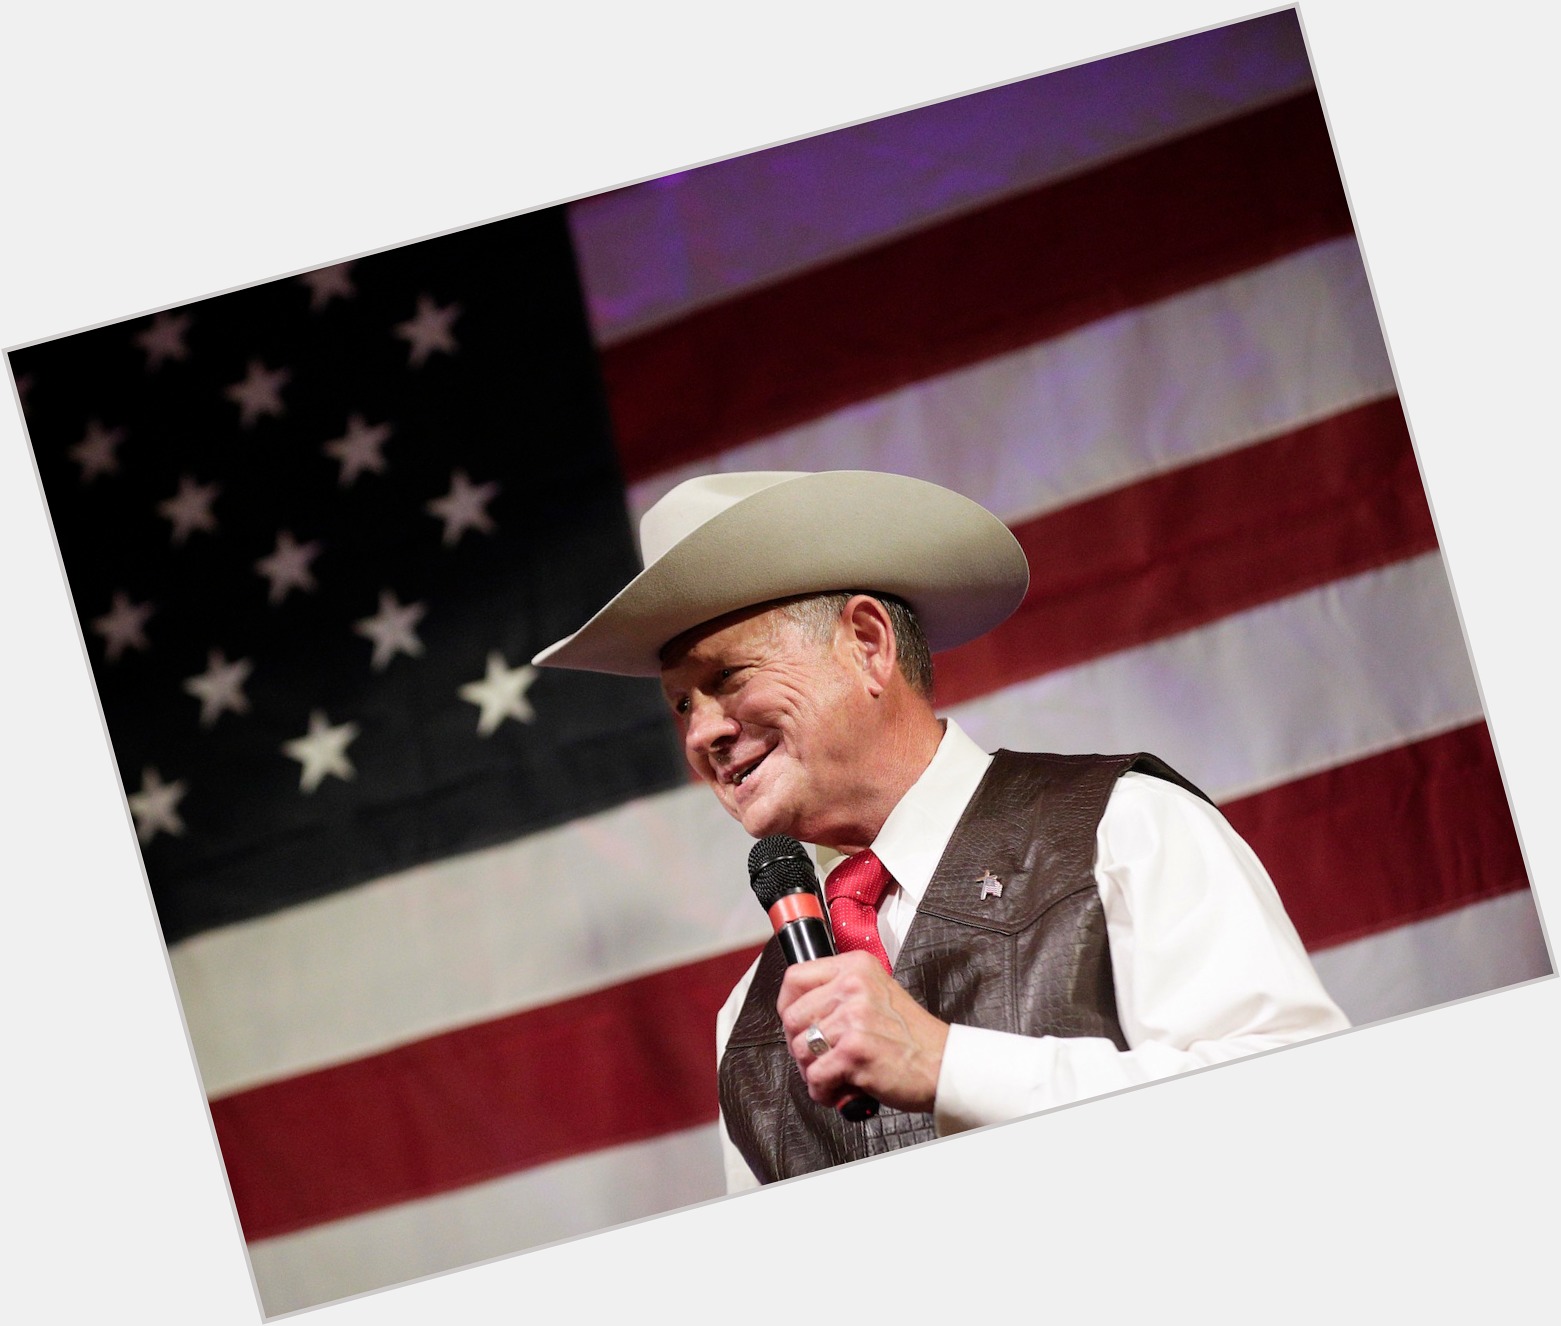 <a href="/hot-men/roy-moore/where-dating-news-photos">Roy Moore</a>  bald hair & hairstyles